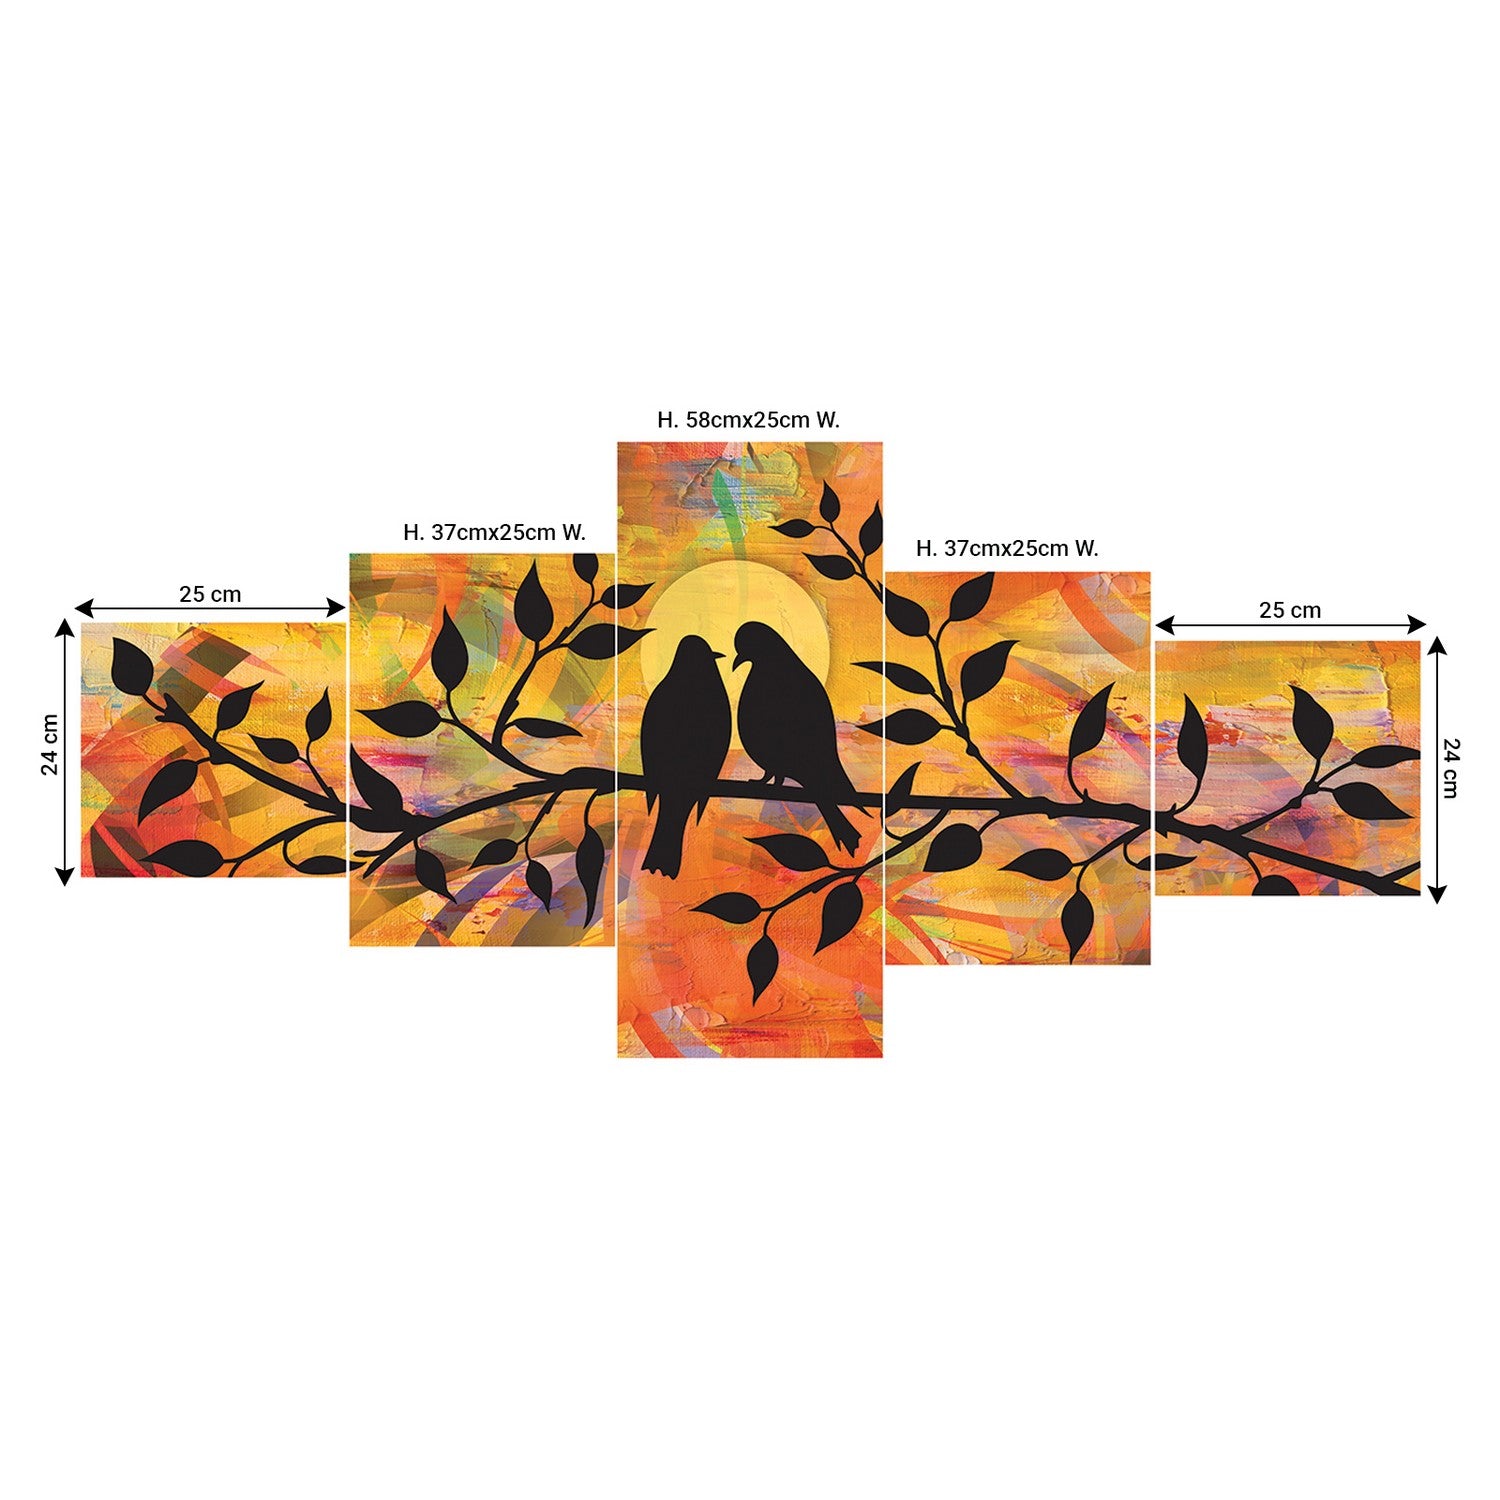 Set of 5 Birds Couple Sitting on Tree Branch Premium Sunboard Panels Painting 2